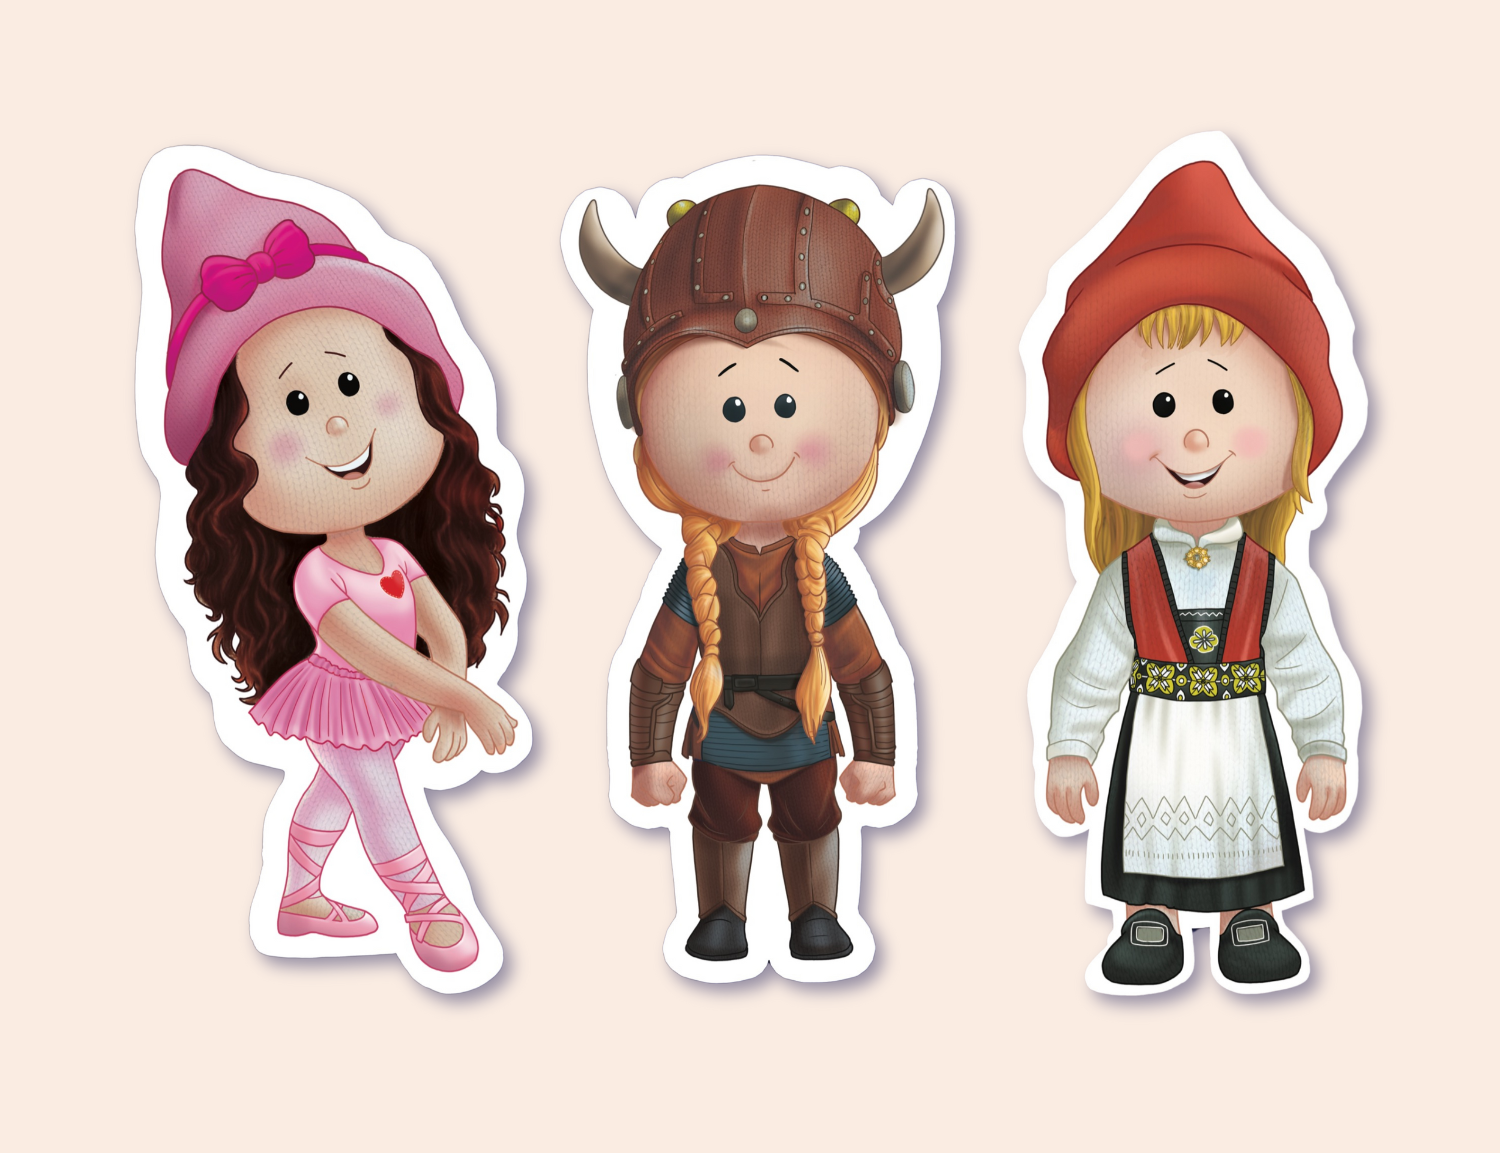 A collection of three stickers featuring girl characters in various costumes. From left to right, there's a girl in a pink ballet outfit with a matching bow, a girl dressed as a shieldmaiden in Viking armor with a helmet, and a girl wearing a traditional Norwegian bunad with a red hat. Each character is smiling and presented against a clear background, ready to be peeled off and used.